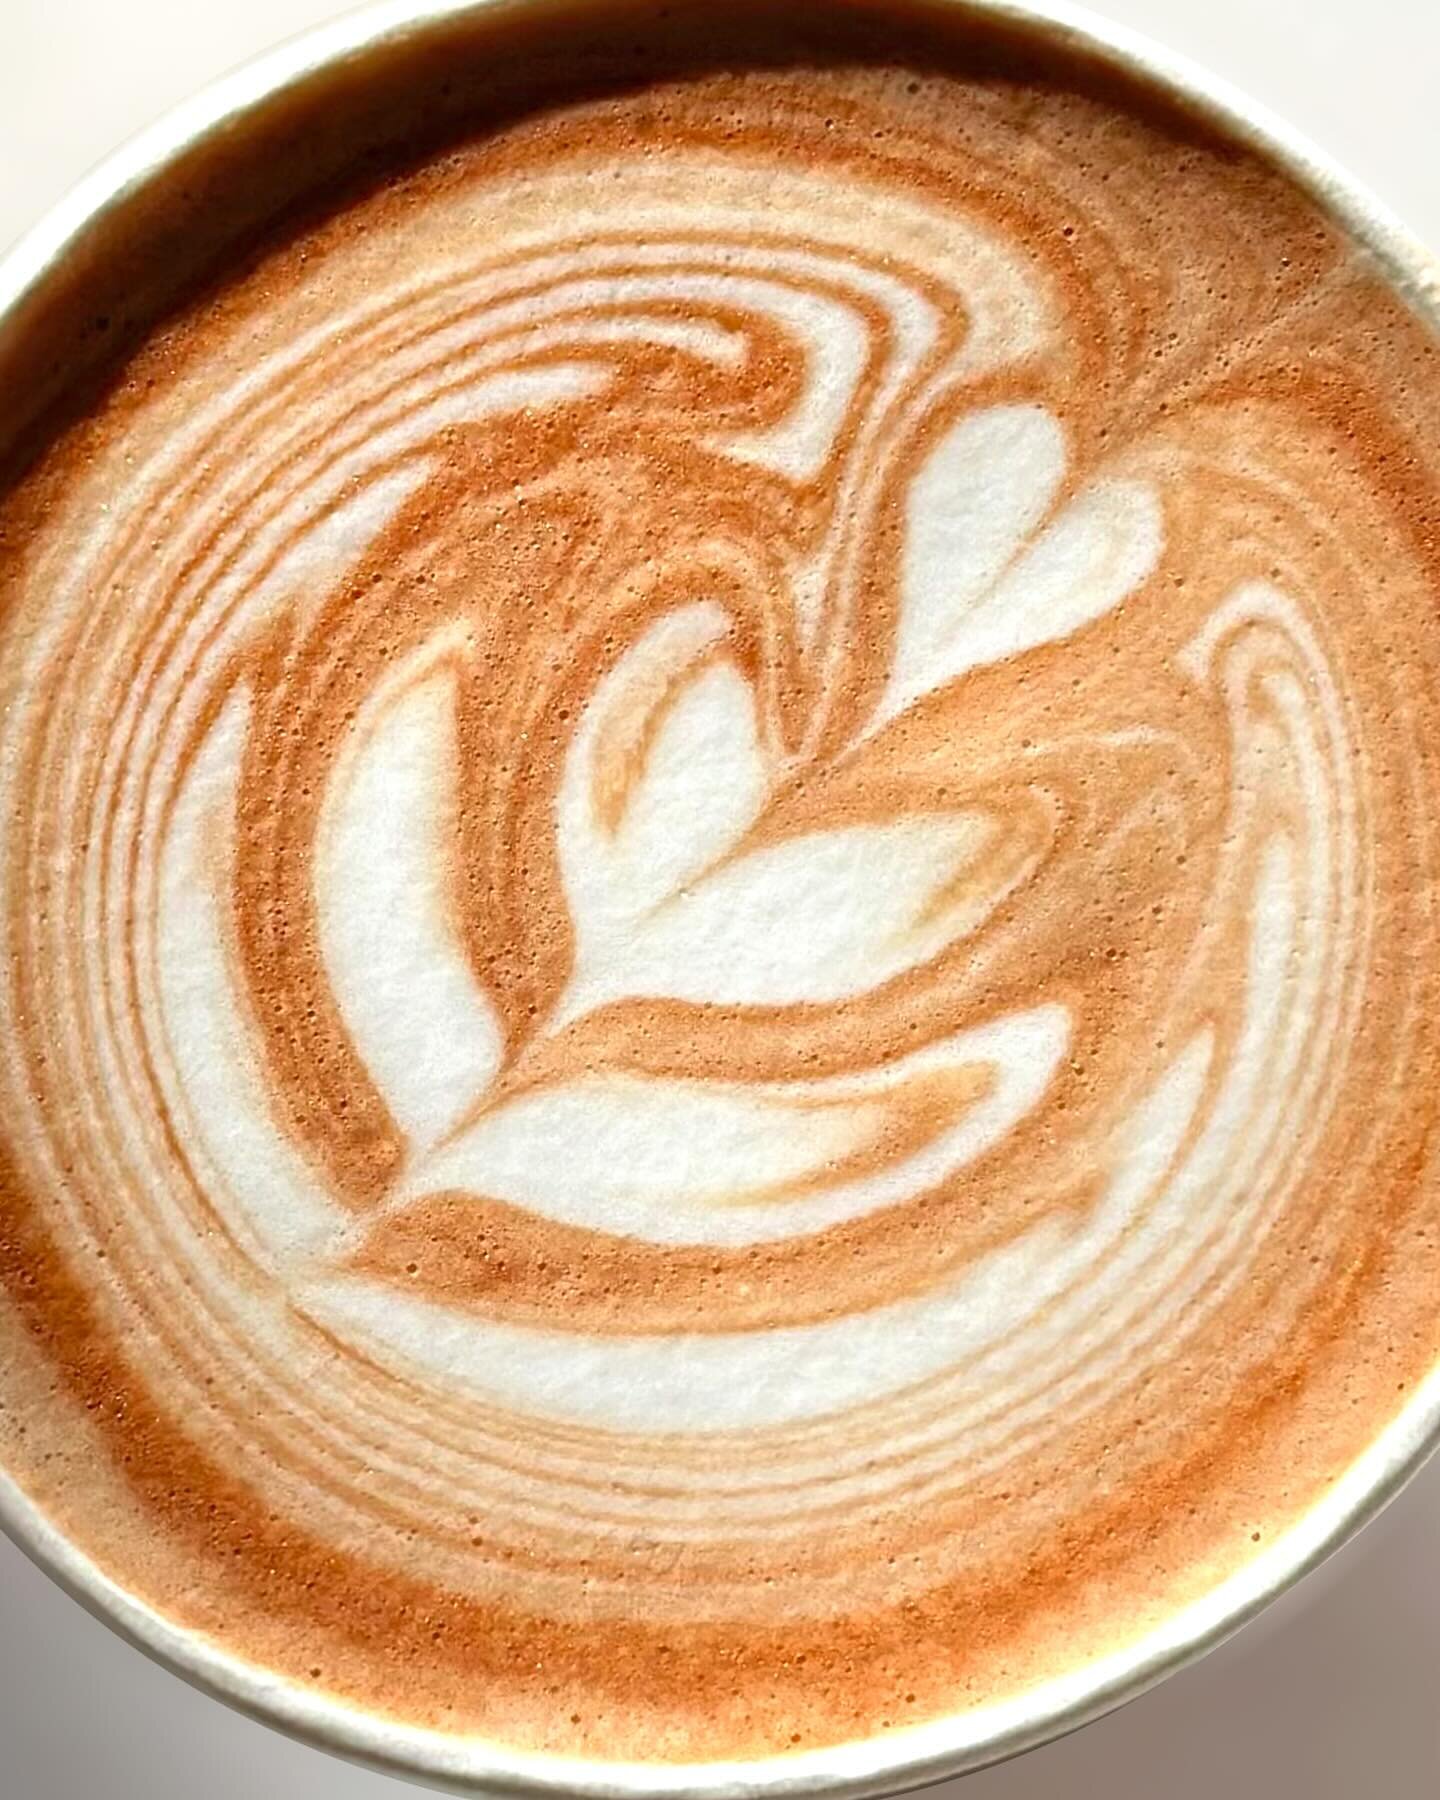 How do I love thee,
Let me count the latte layers ❤️🩷

You are an amazing wonderful person and you deserve all the great things. Happy Valentine&rsquo;s Day to you! 🥰 
We can&rsquo;t wait to see you! 

#love #beanbarsc #coffee #latte #latteart #val